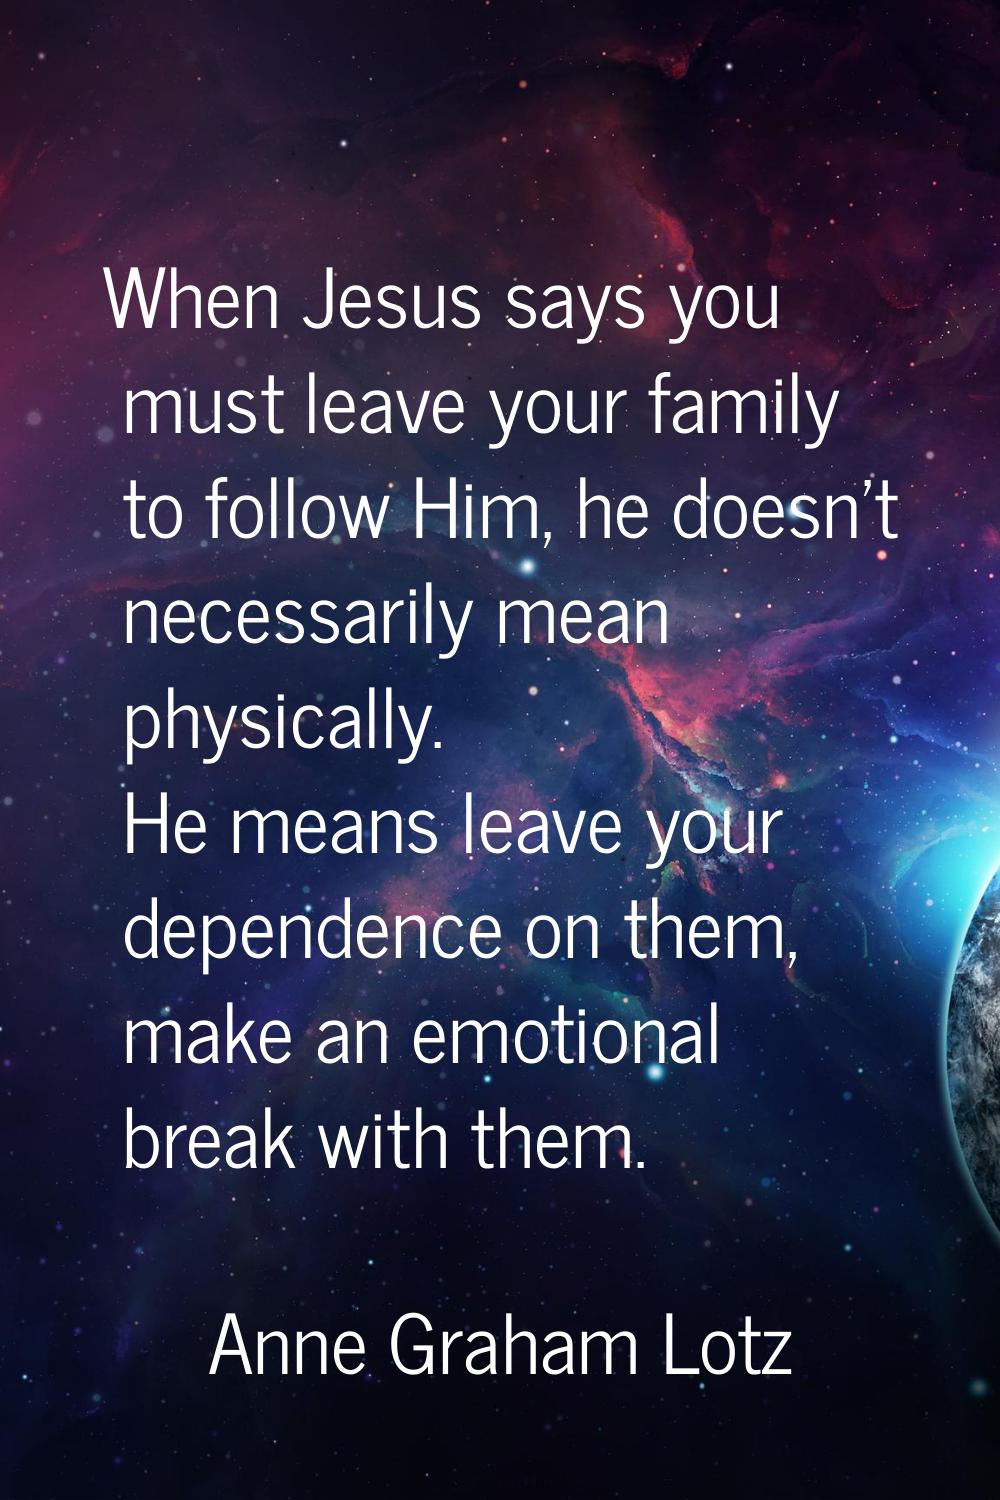 When Jesus says you must leave your family to follow Him, he doesn't necessarily mean physically. H